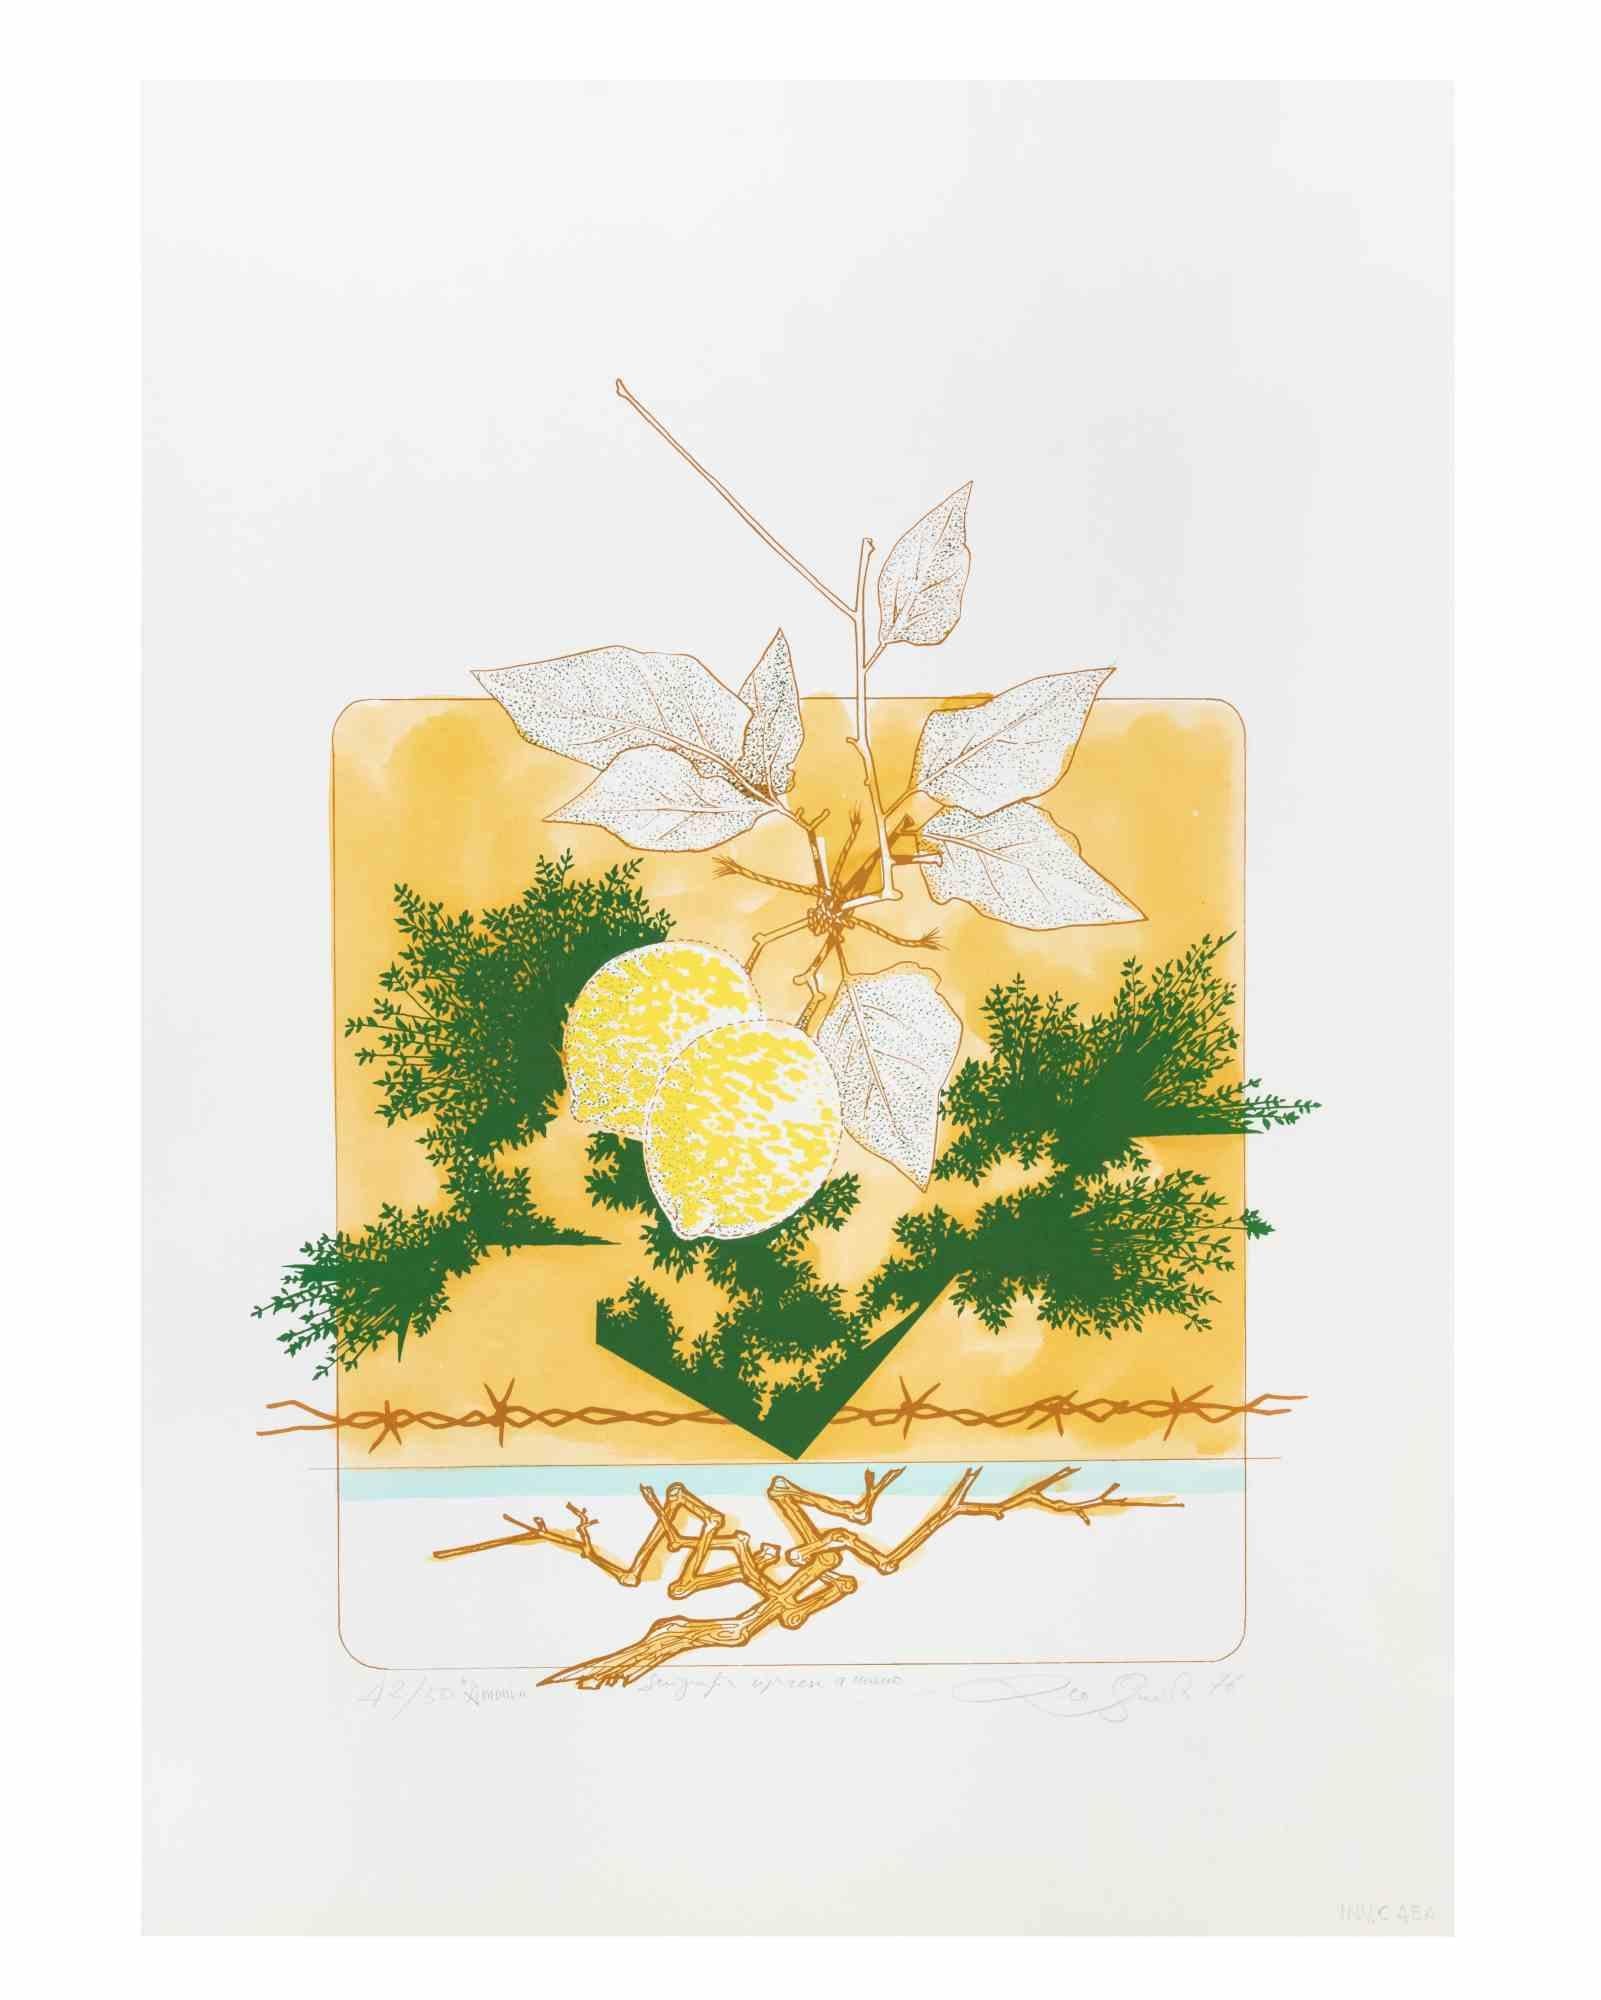 Still Life is an artwork realized in 1976 by the Italian Contemporary artist  Leo Guida  (1992 - 2017).

Original screen print on cardboard

Hand-signed on the lower right in pencil and dated. Numbered on the lower left, edition of 50 prints. 

Good